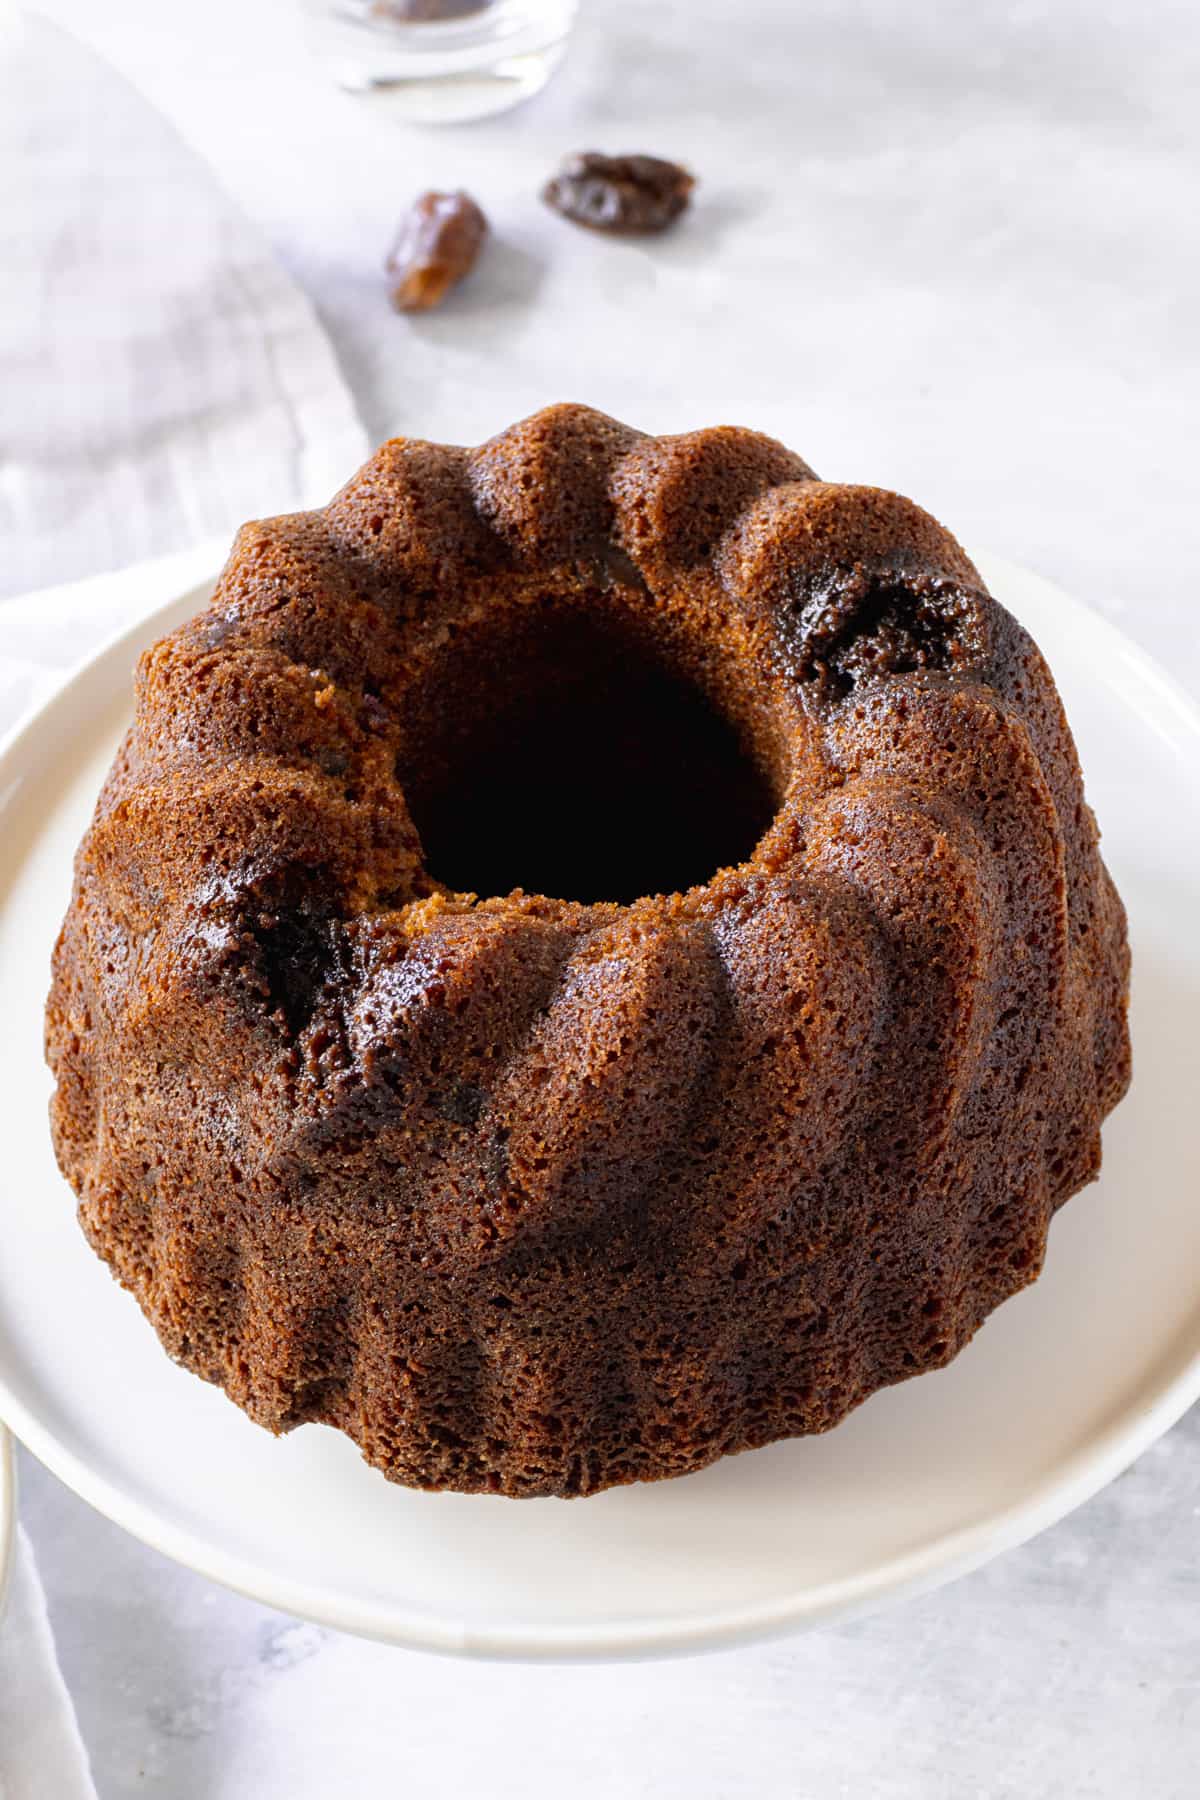 Date infused bundt cake on a white cake plate